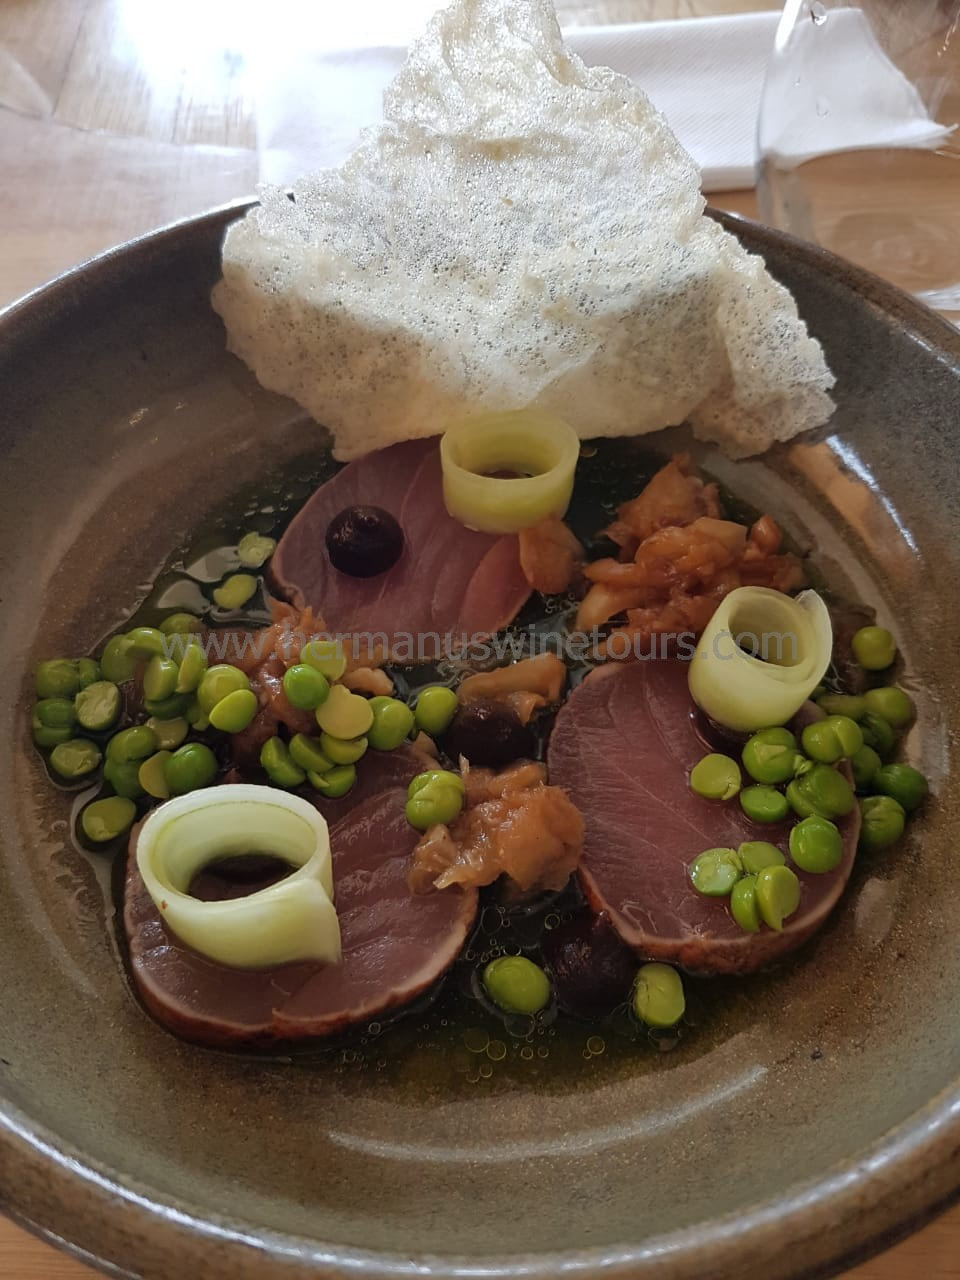 Seared tuna cutlets in soya sauce peas and leeks, Hermanus restaurant, near Cape Town, South Africa